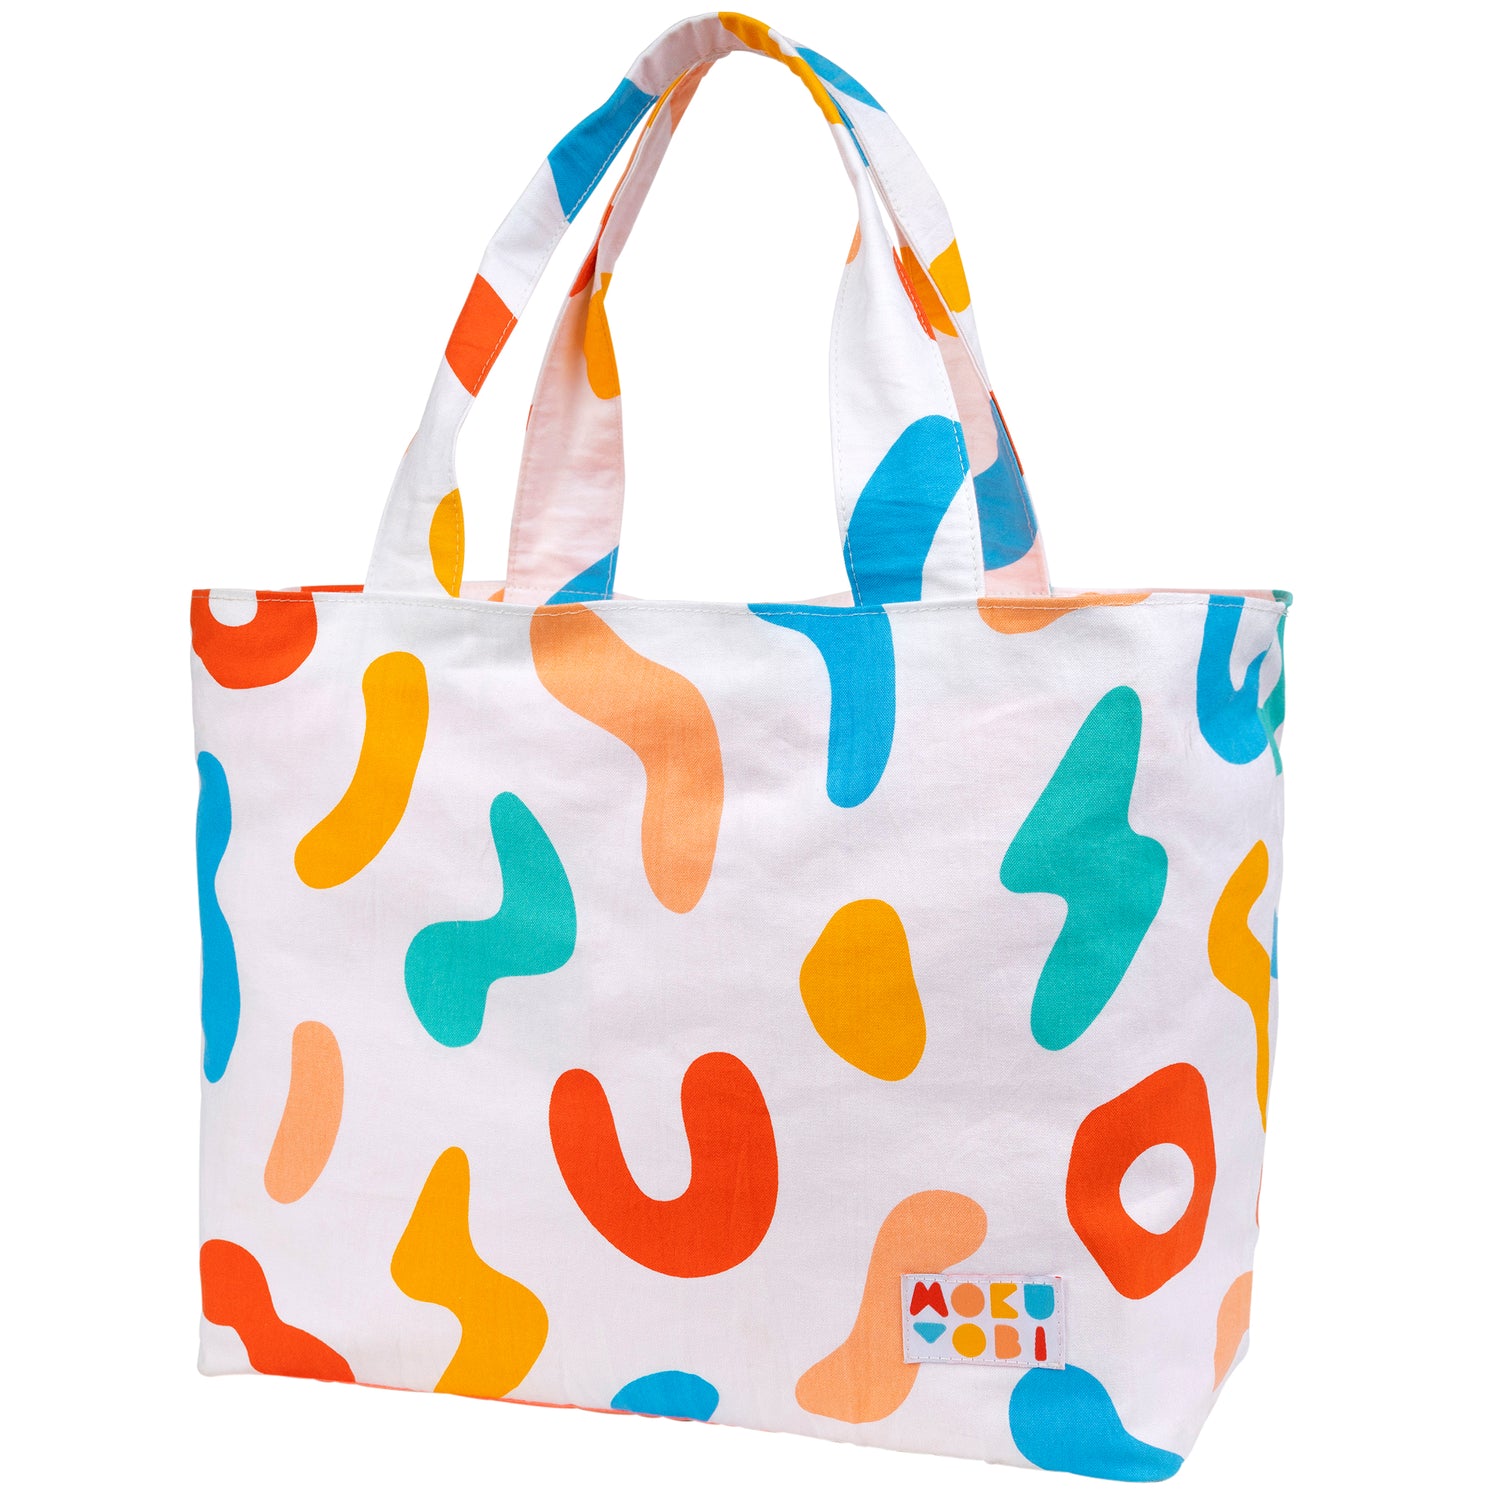 Large tote bag with large colorful squiggles